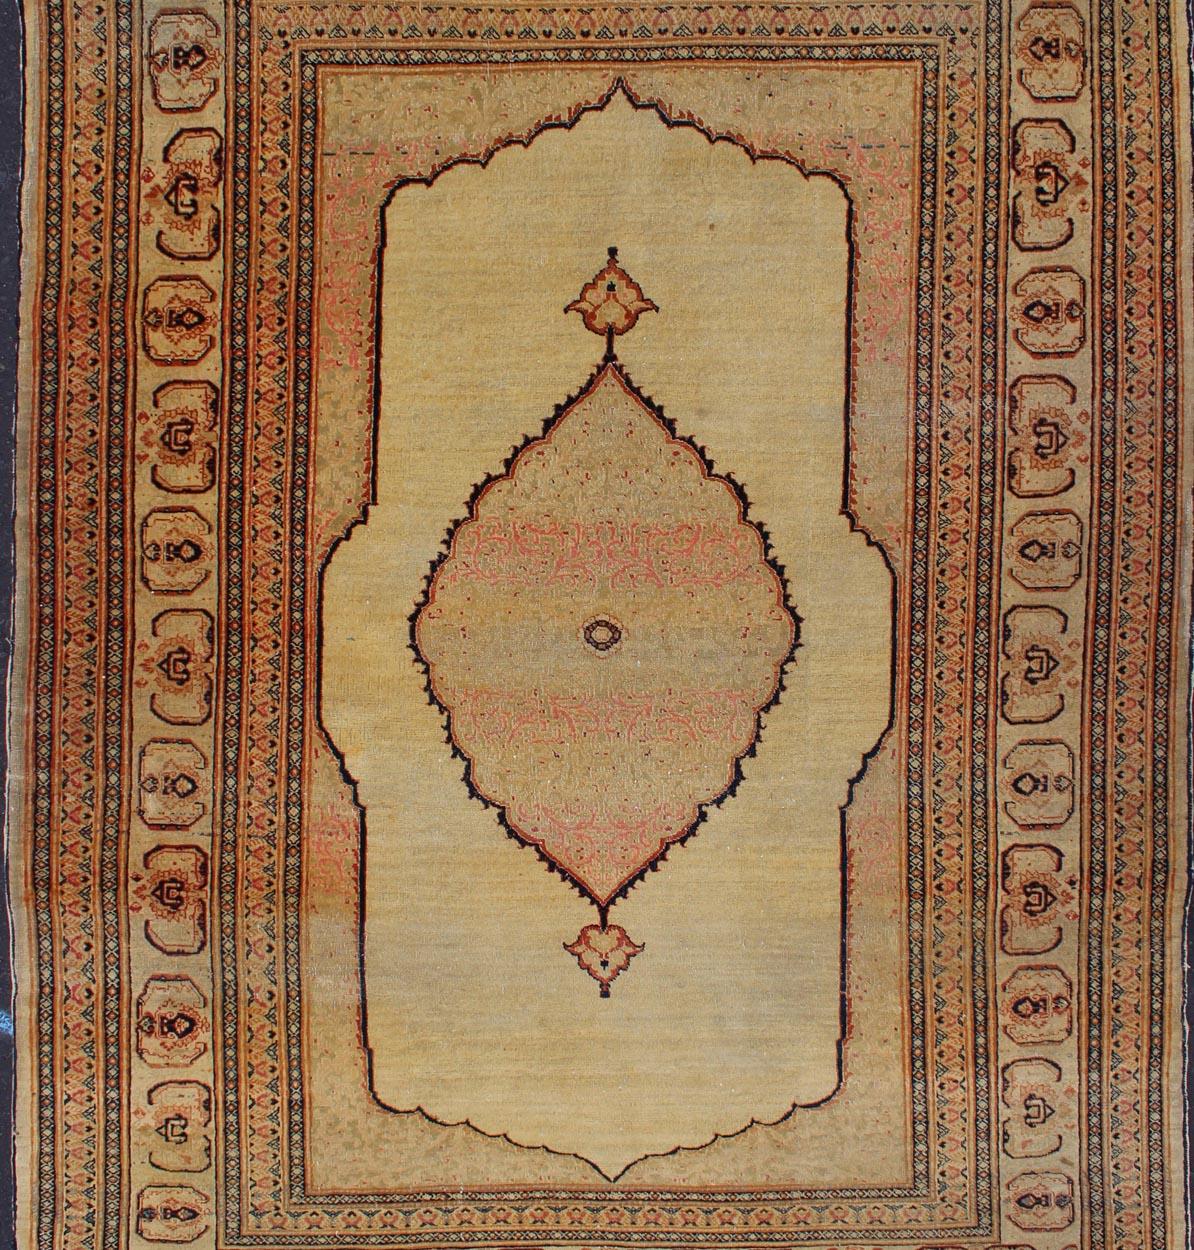 Antique Persian Tabriz Haj Jalili fine rug with Exquisite and Subtle Details, H8-0101.
This magnificent created in the city of Tabriz by the famous master, Haj Jalili and beautifully illustrates the splendor of 19th century Persian design and